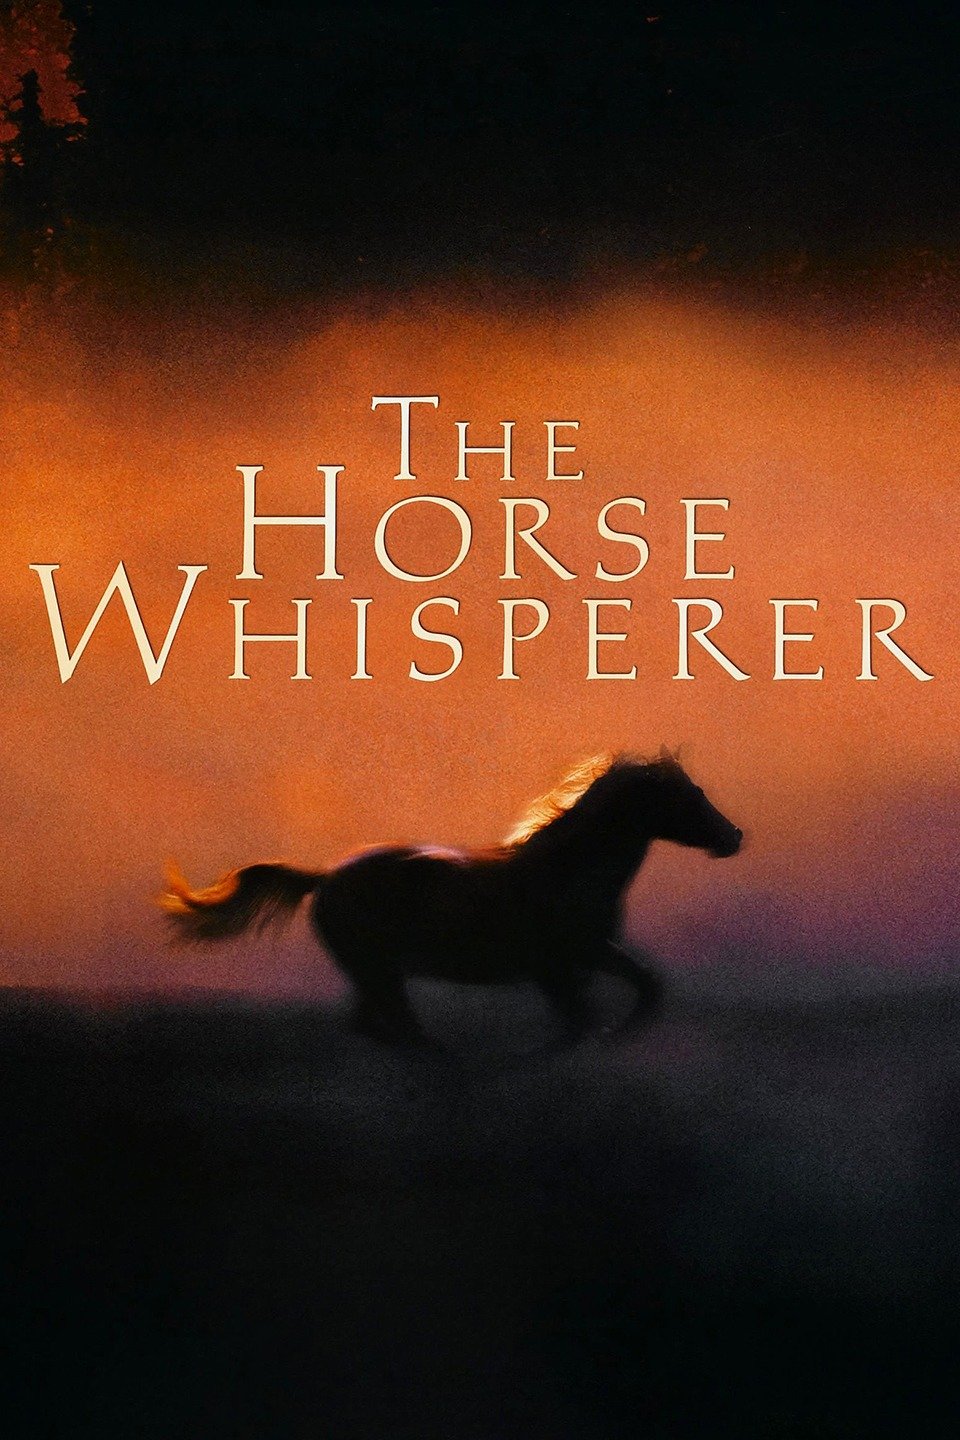 book review the horse whisperer